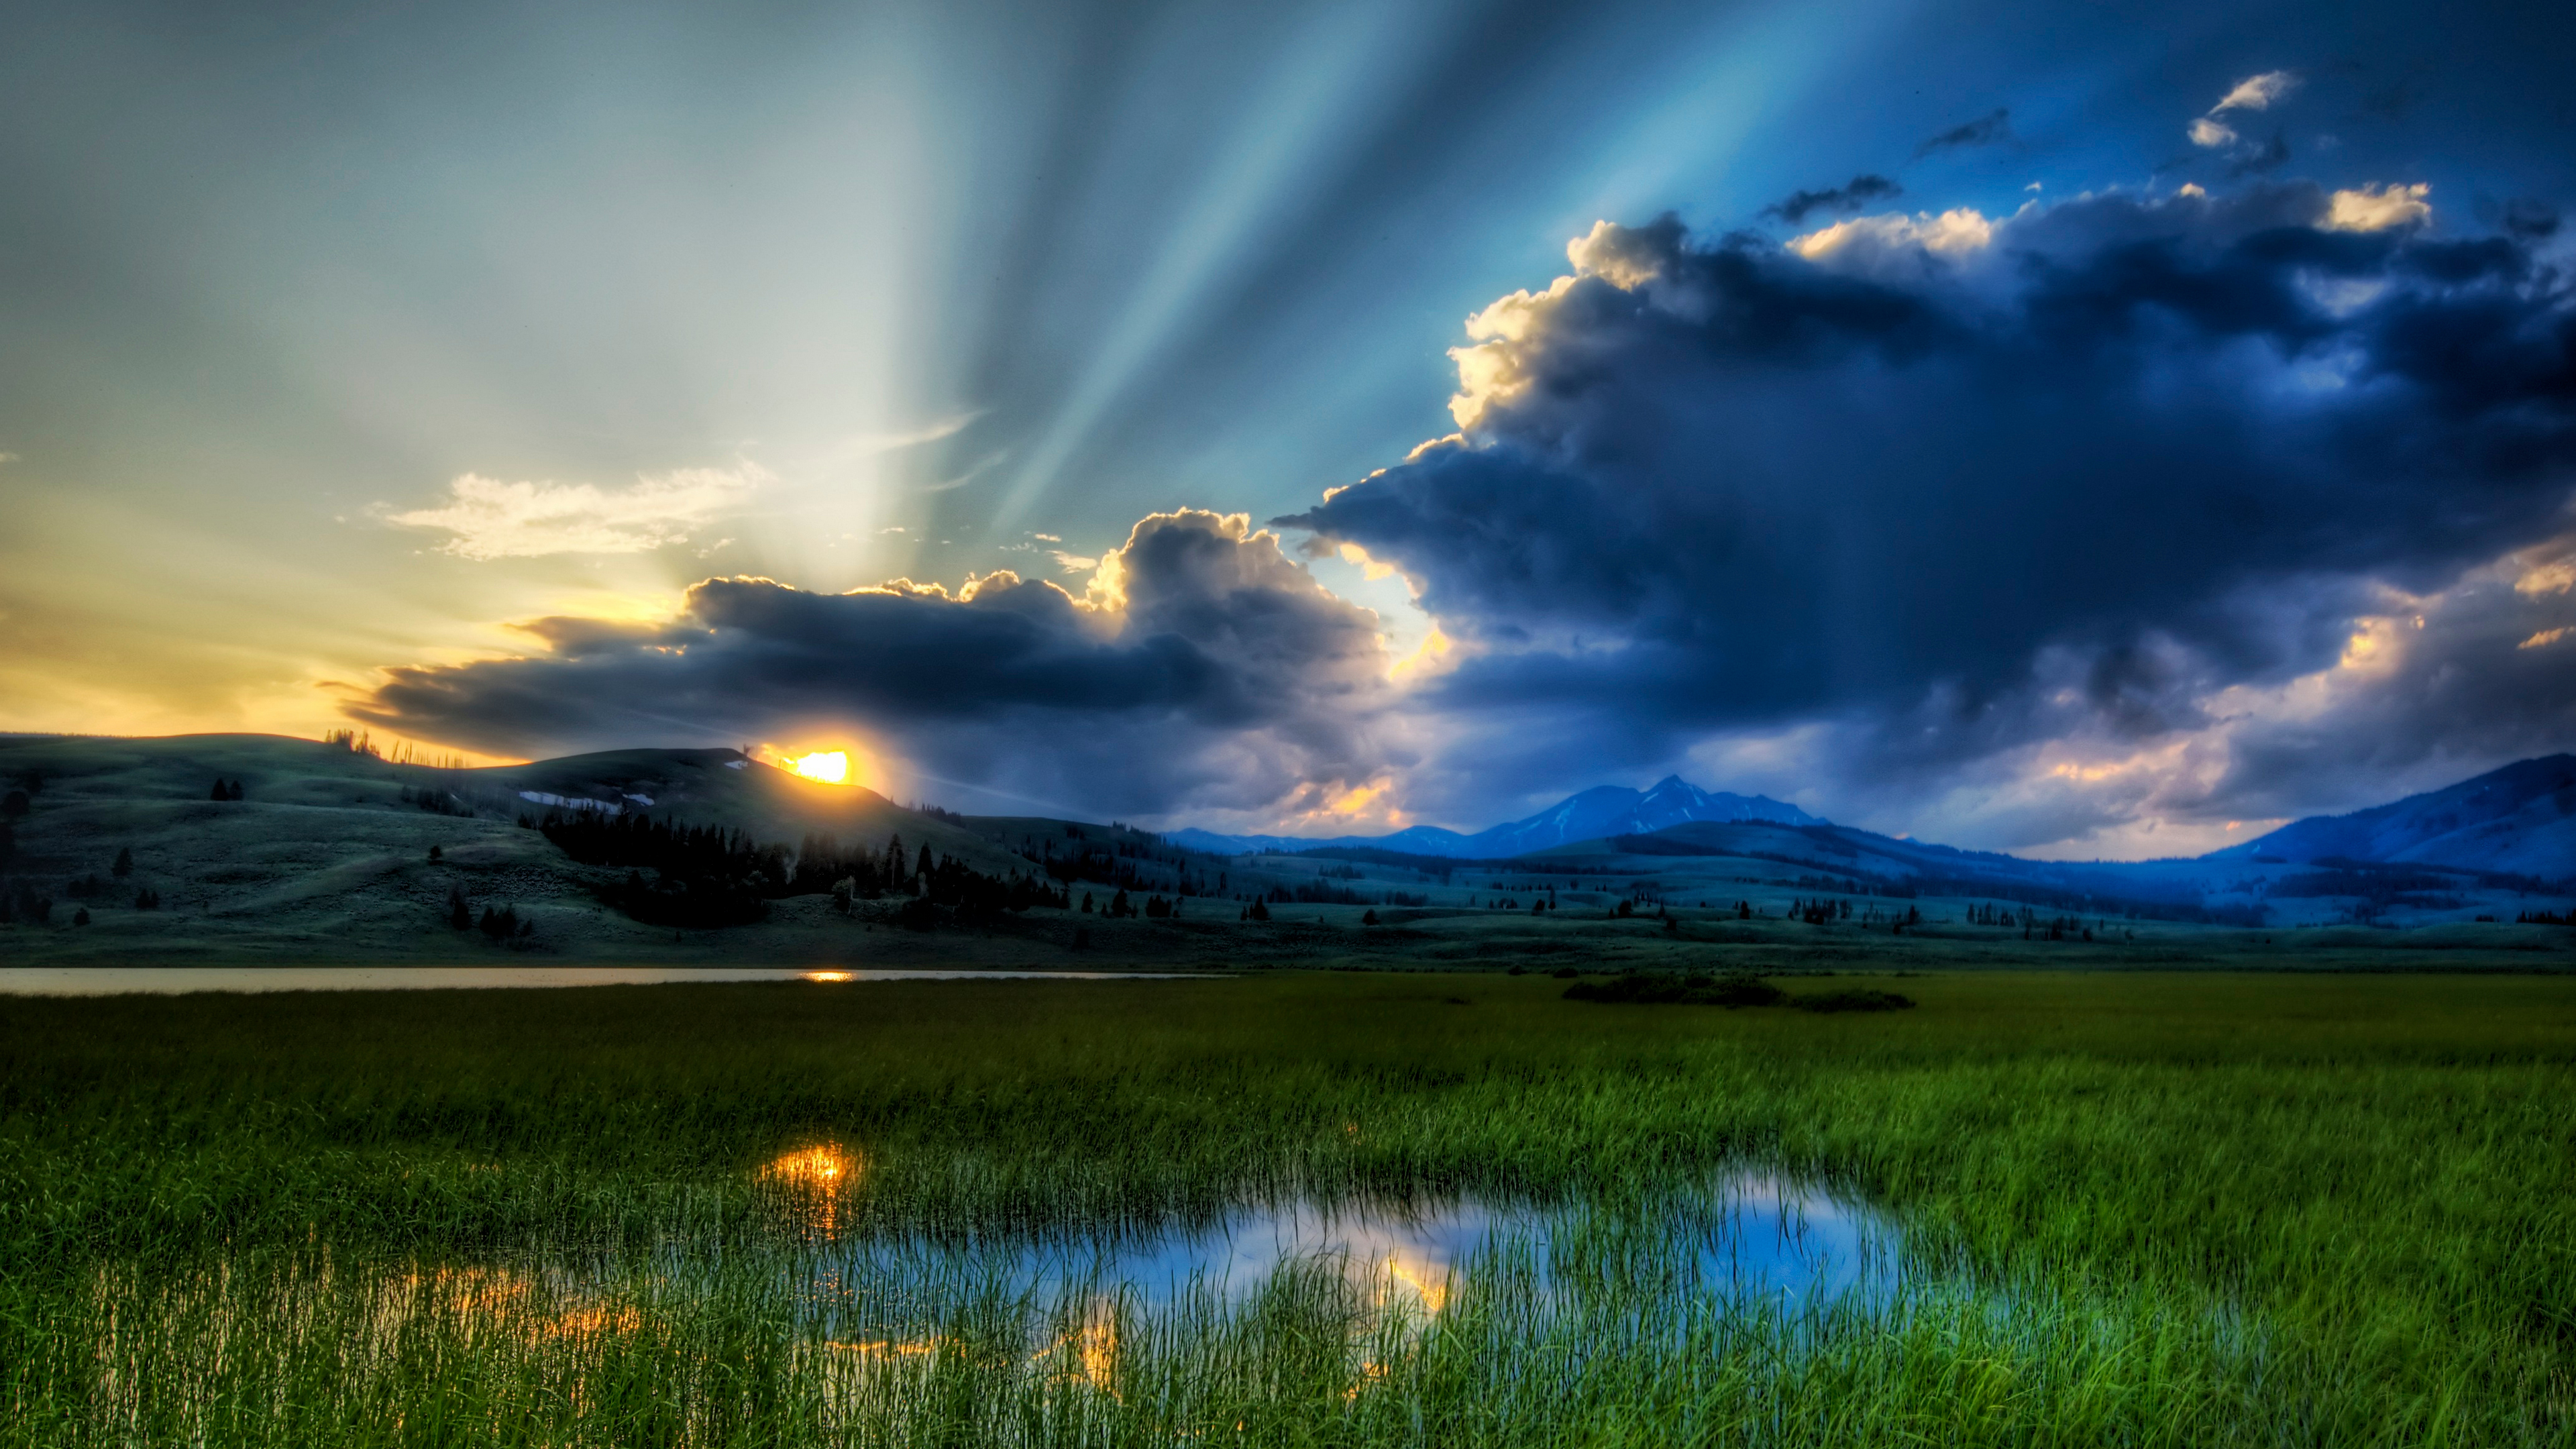 General 3840x2160 Trey Ratcliff photography landscape nature summer sunset water mountains hills sky clouds sunset glow reflection